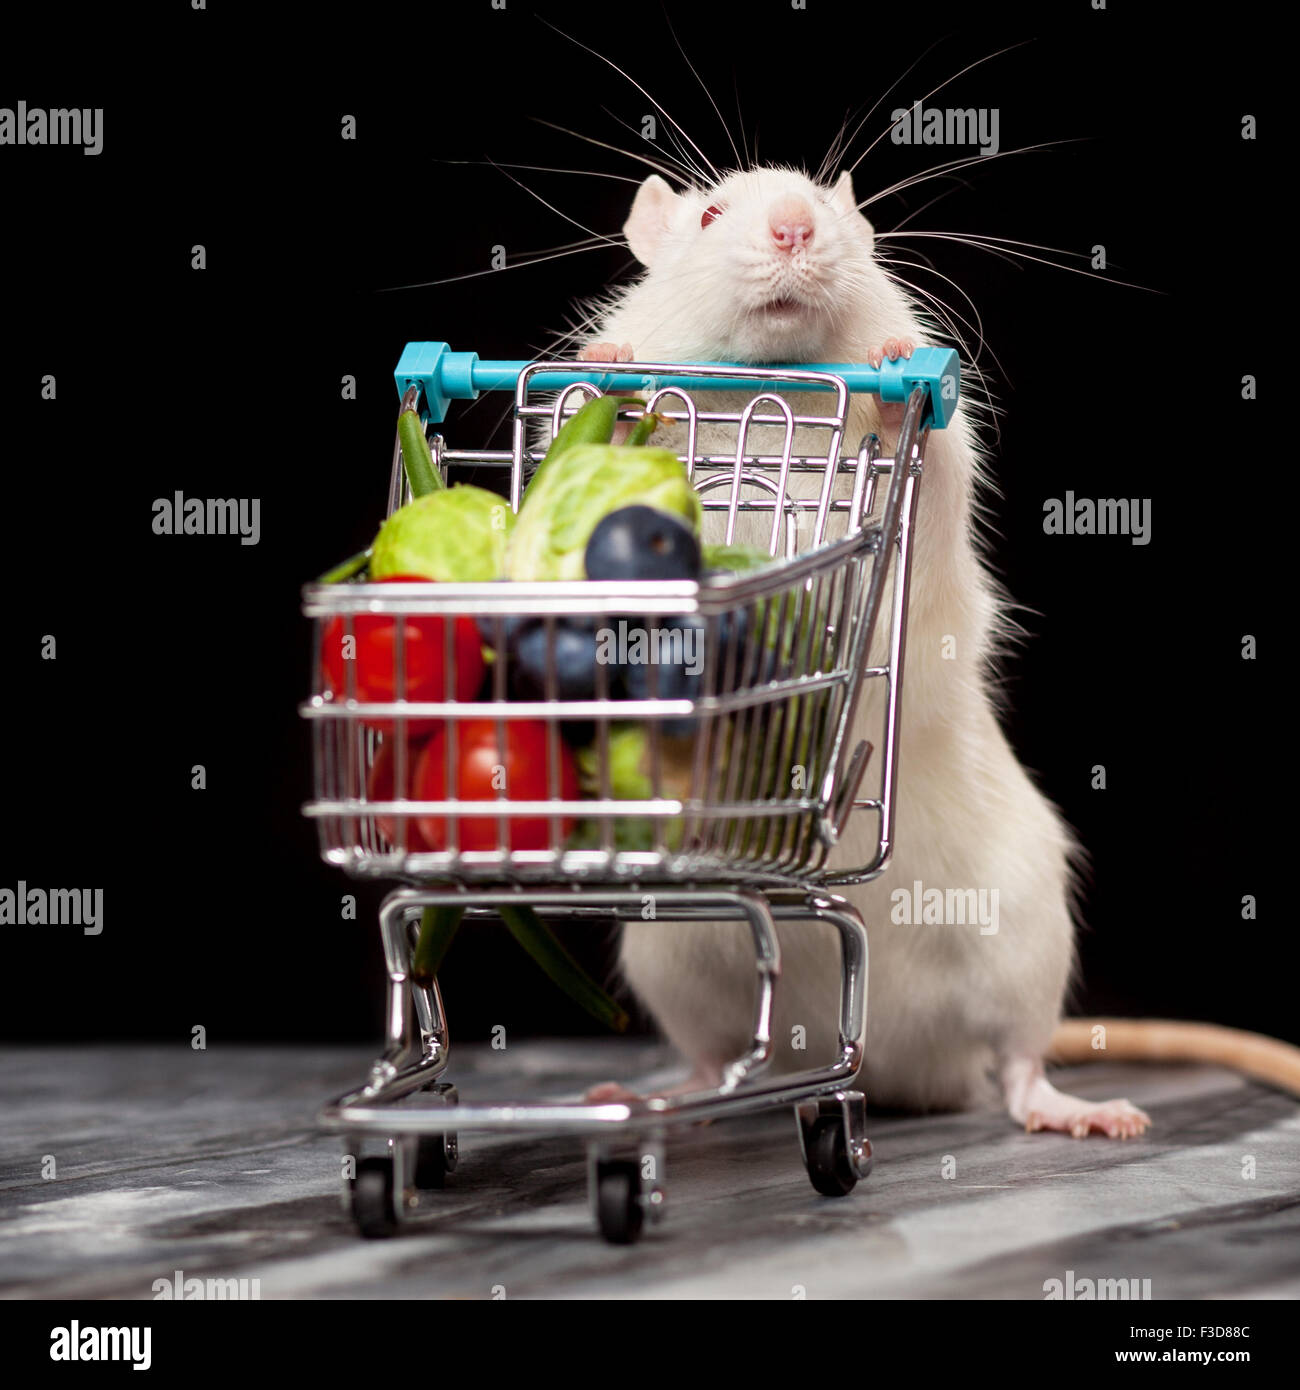 Cute rat with a shopping cart Stock Photo